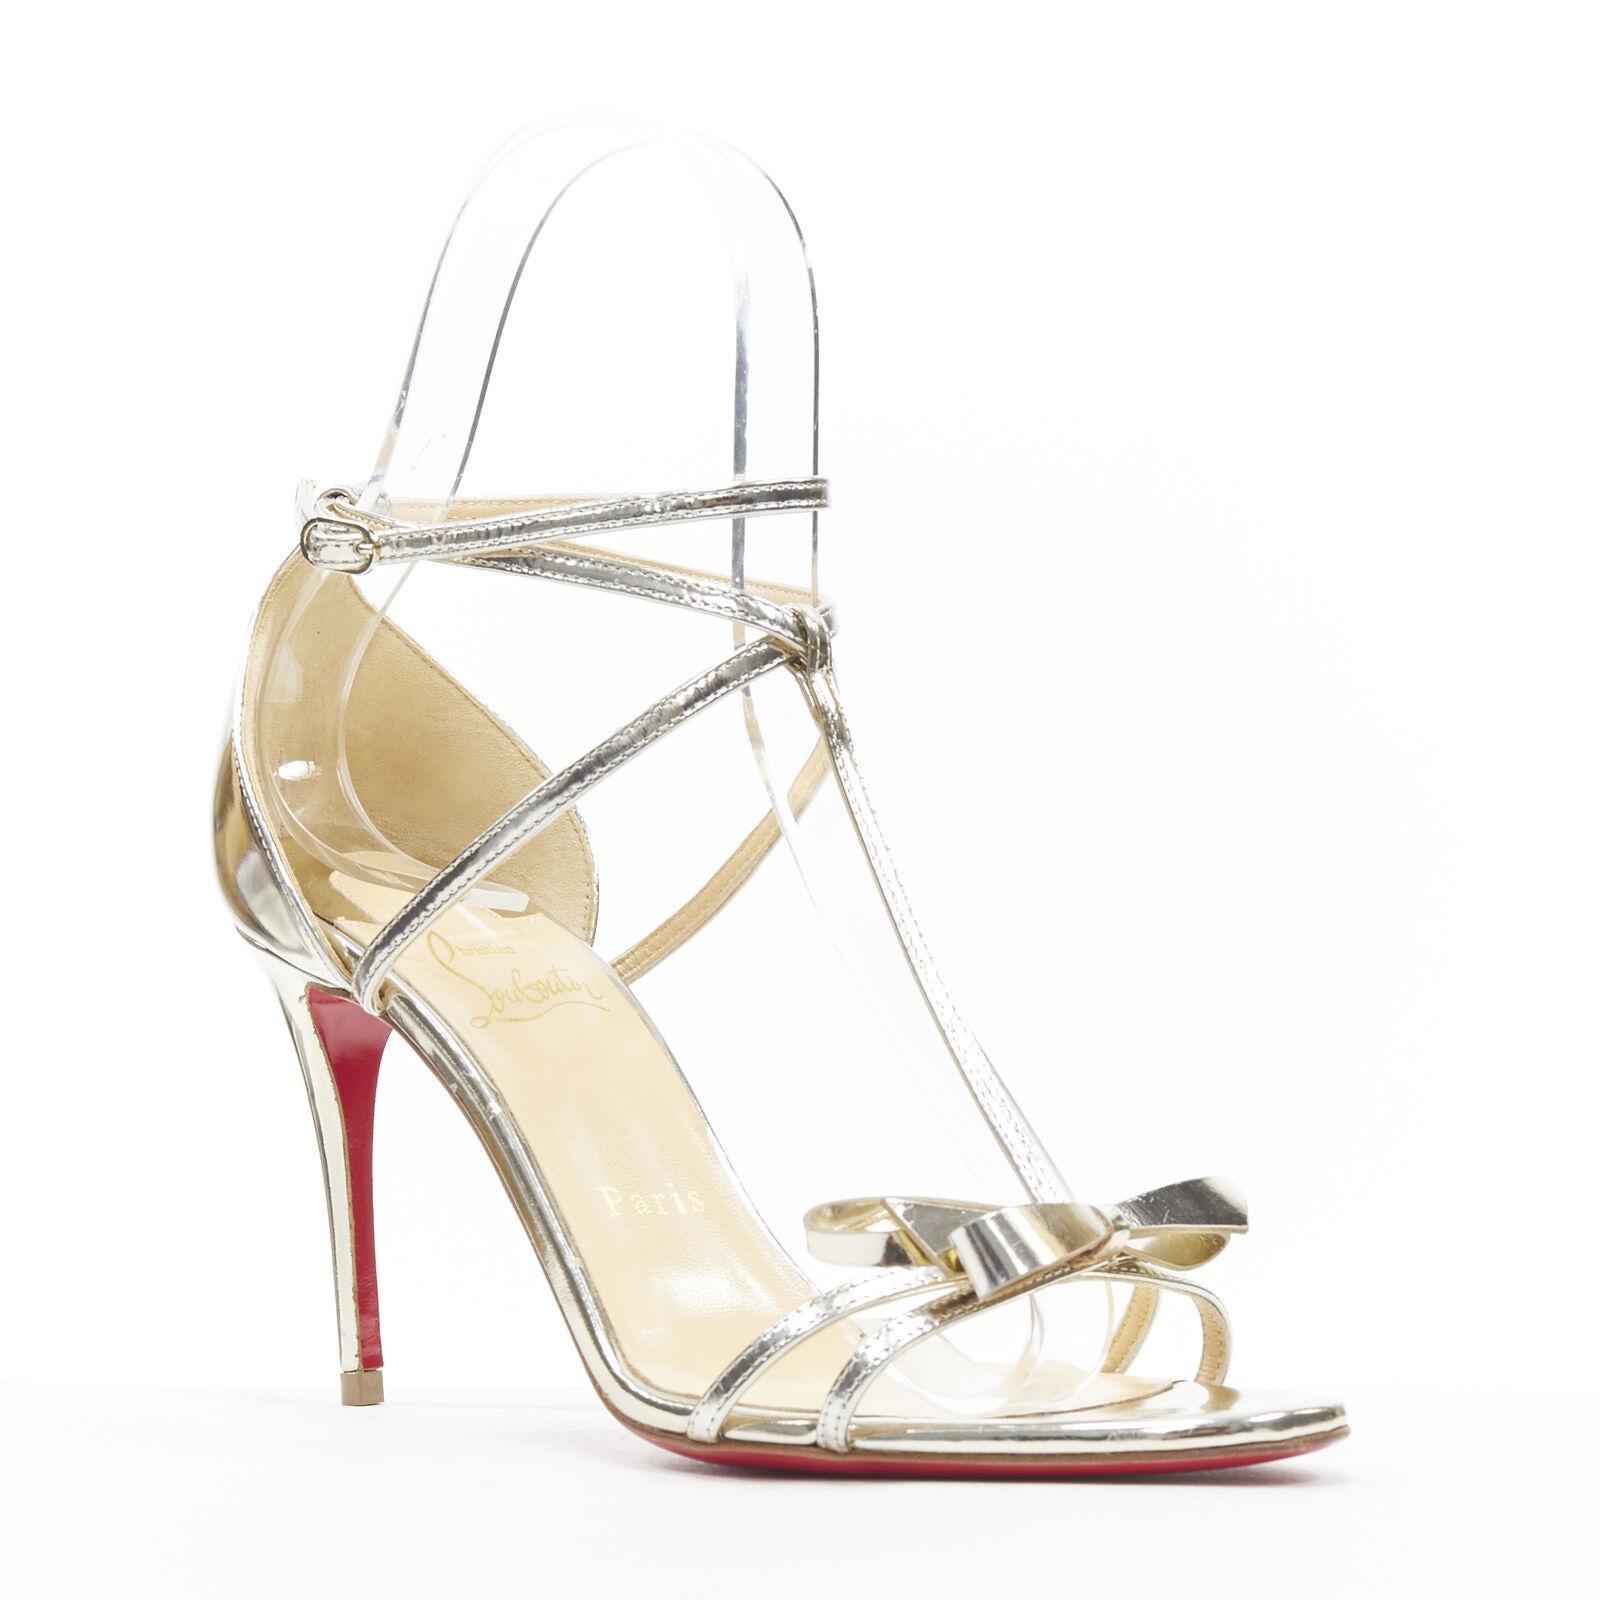 new CHRISTIAN LOUBOUTIN Blakissima metallic silver bow t-strap sandals EU37.5
Reference: TGAS/A05677
Brand: Christian Louboutin
Model: Blakissima
Material: Leather
Color: Gold
Pattern: Solid
Closure: Ankle Strap
Extra Details: Flap over
Made in: